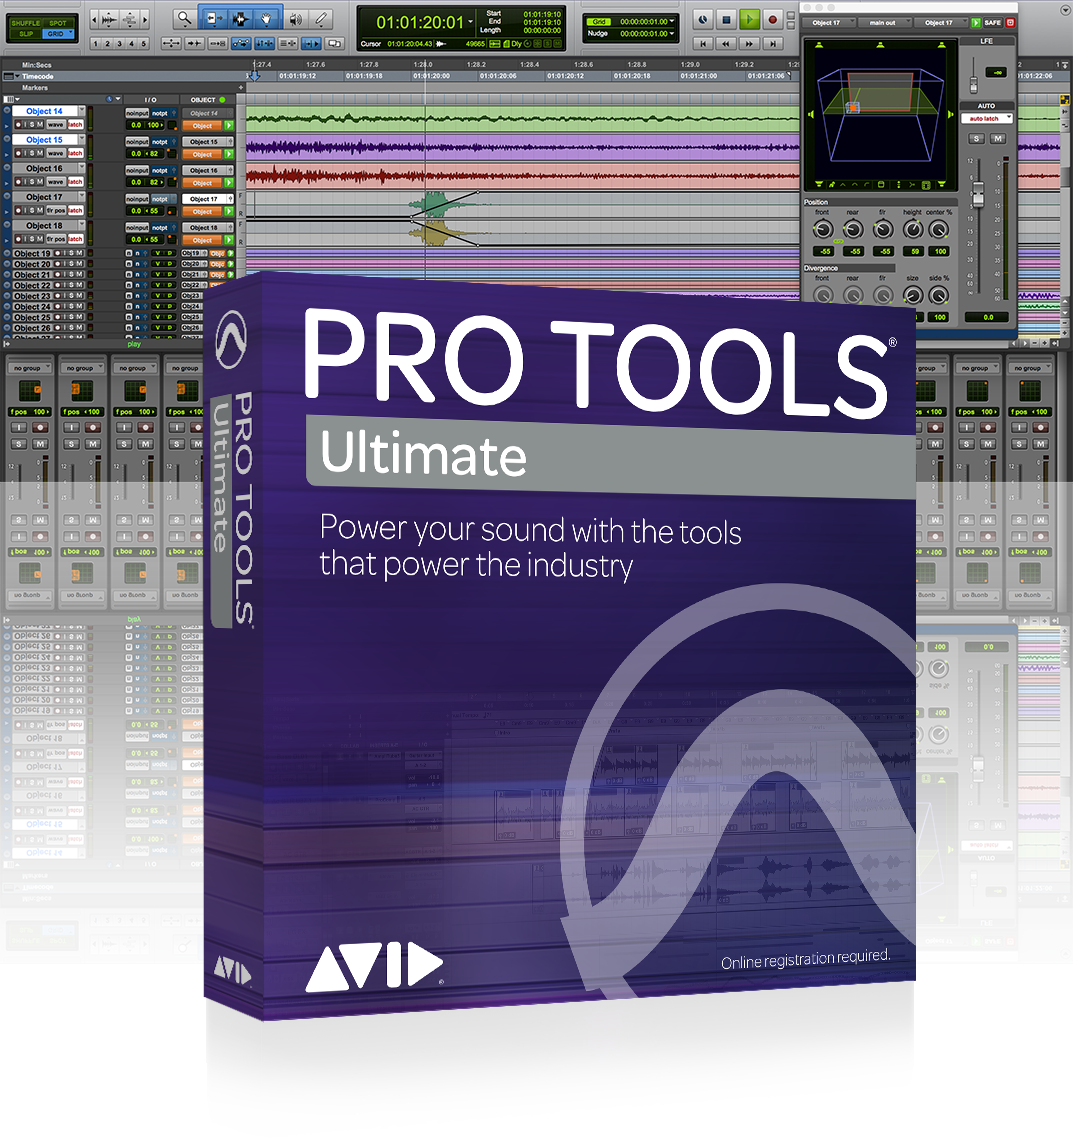 Avid ProTools Ultimate Perp License TRADE-UP